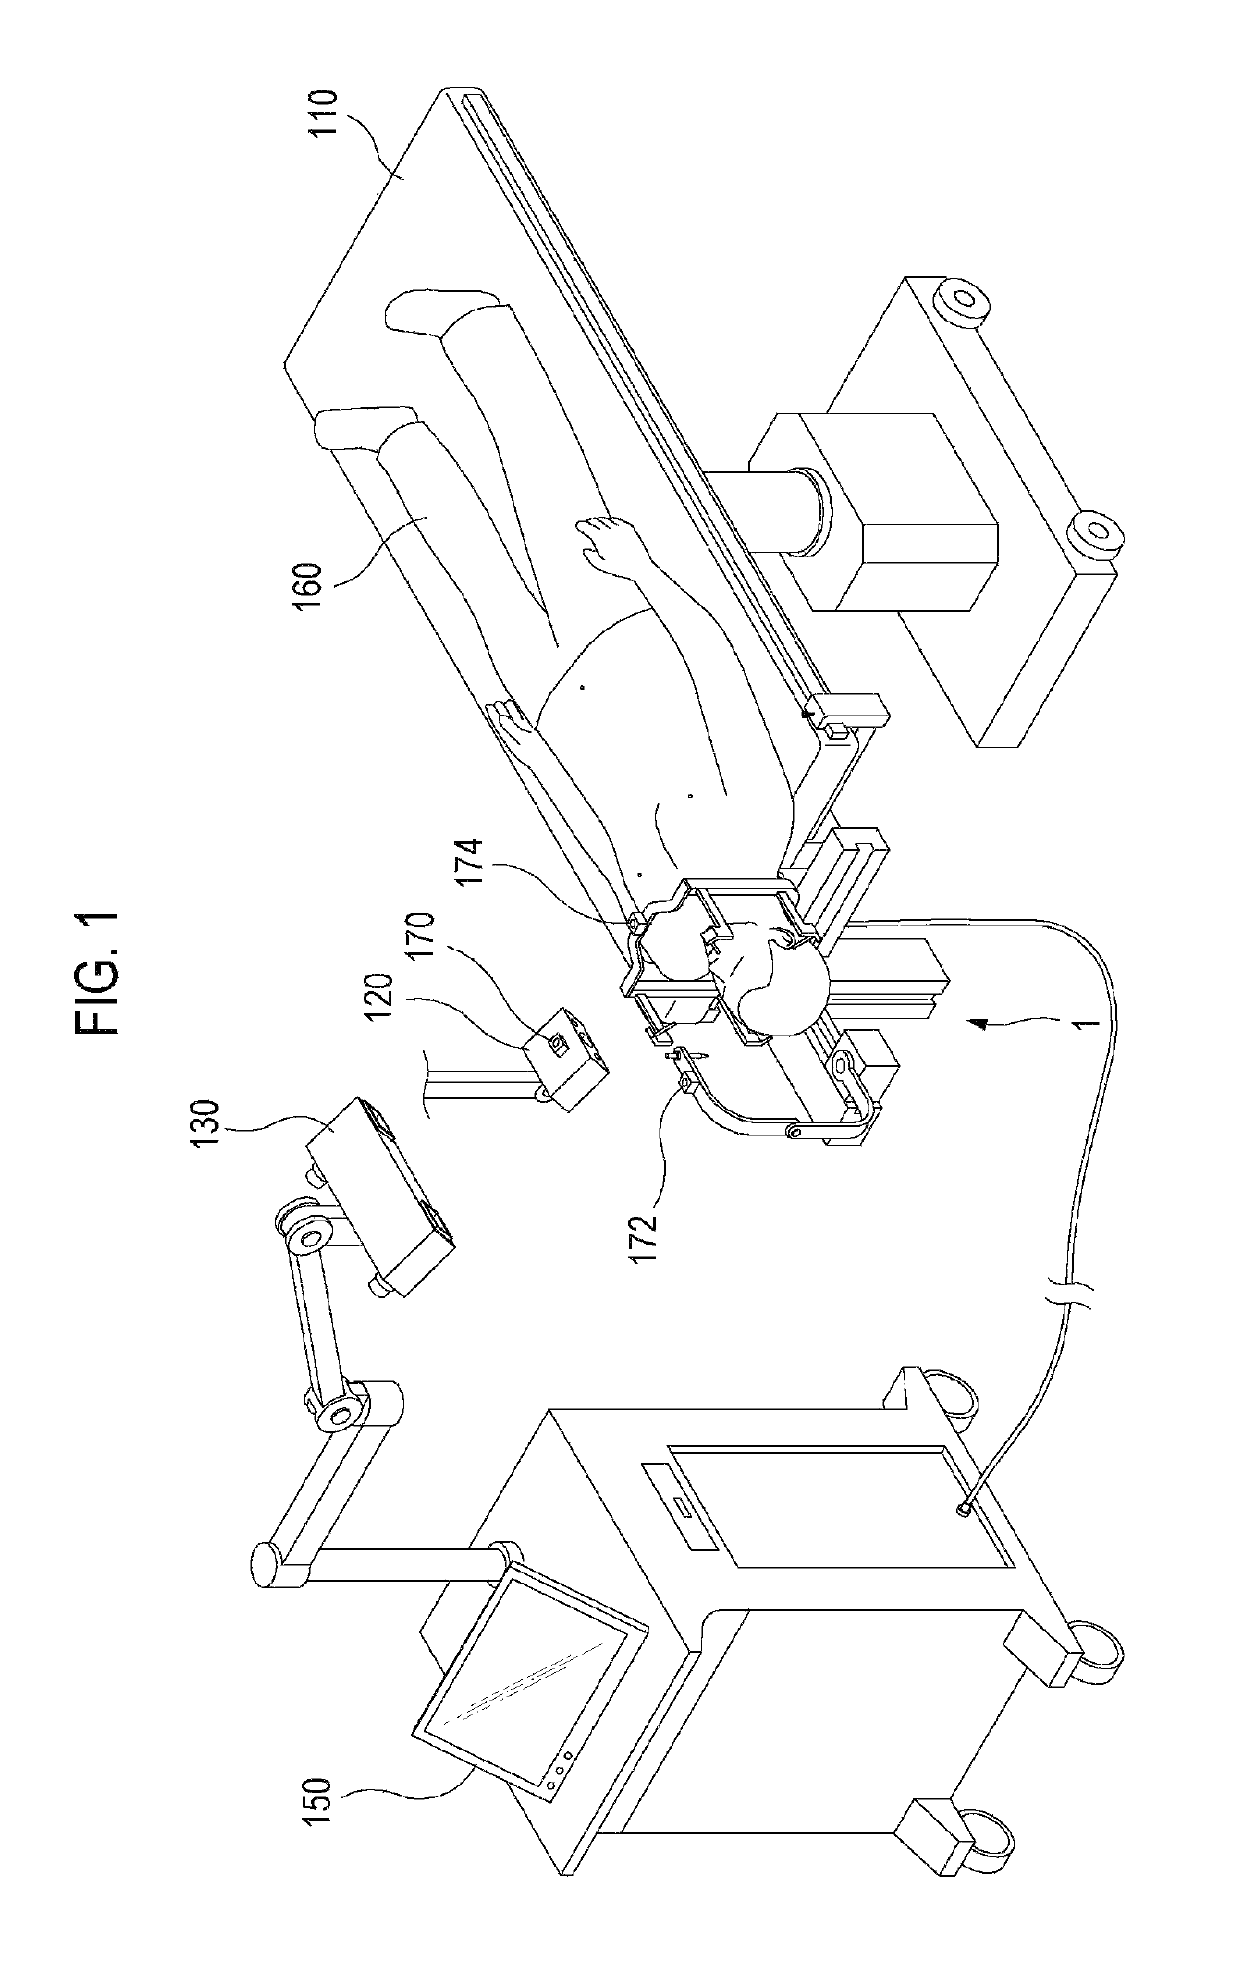 Surgical robot system for stereotactic surgery and method for controlling stereotactic surgery robot